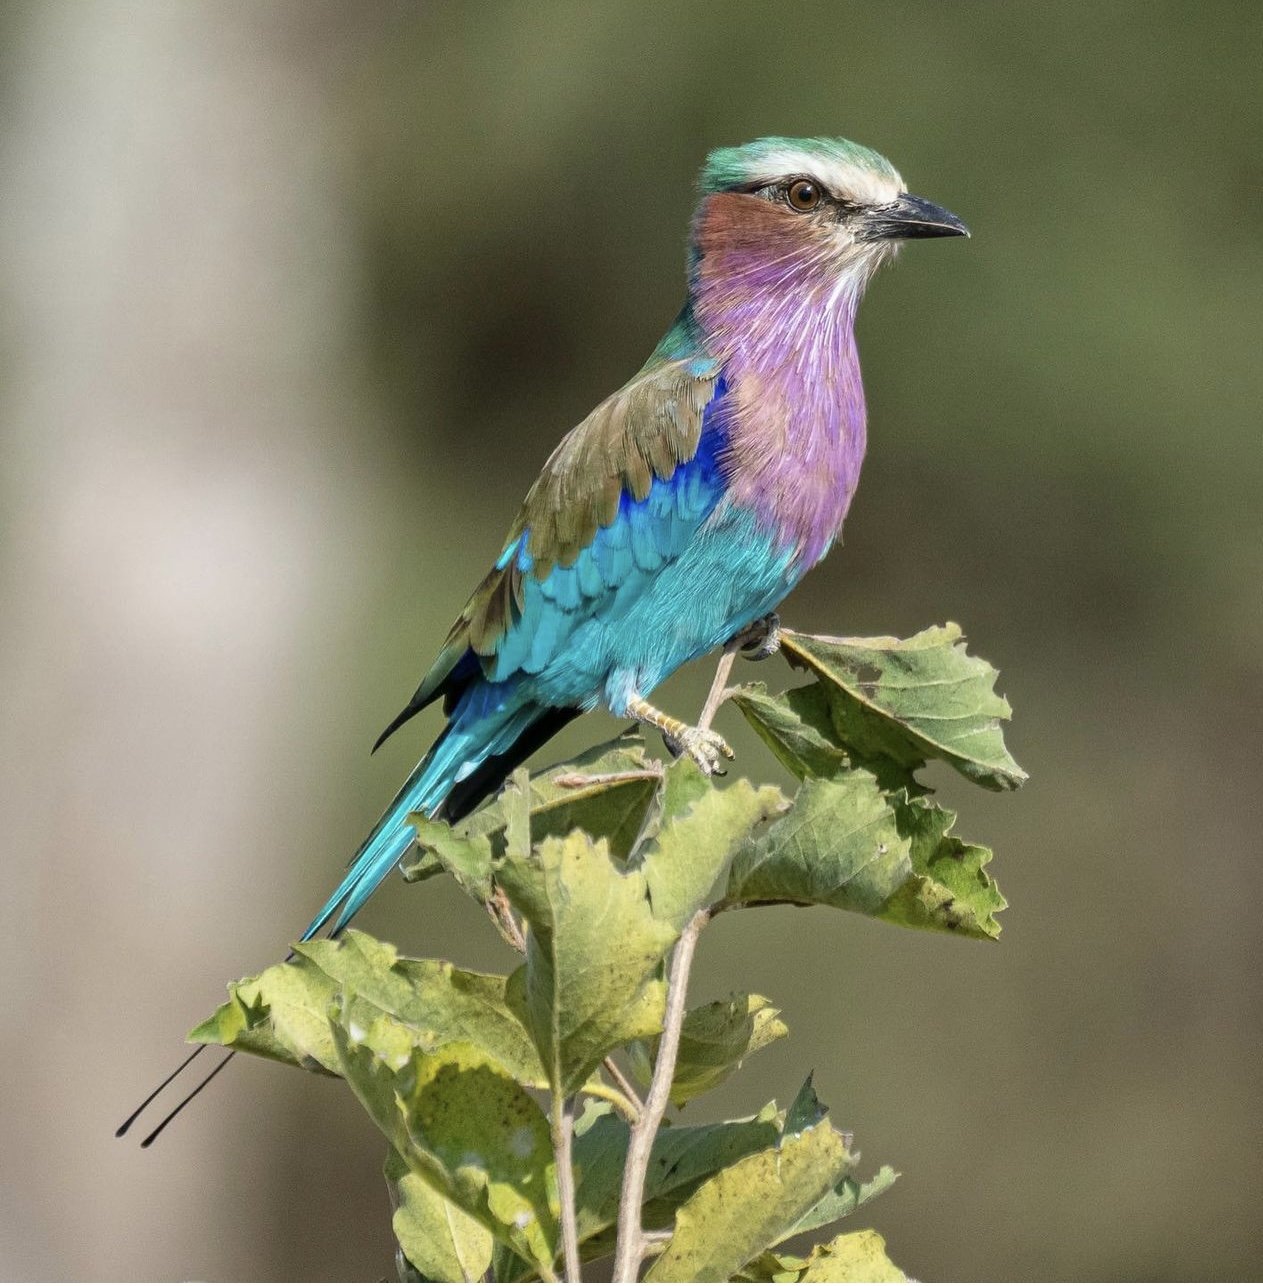 Lilac-breasted Roller on Leafy Branch